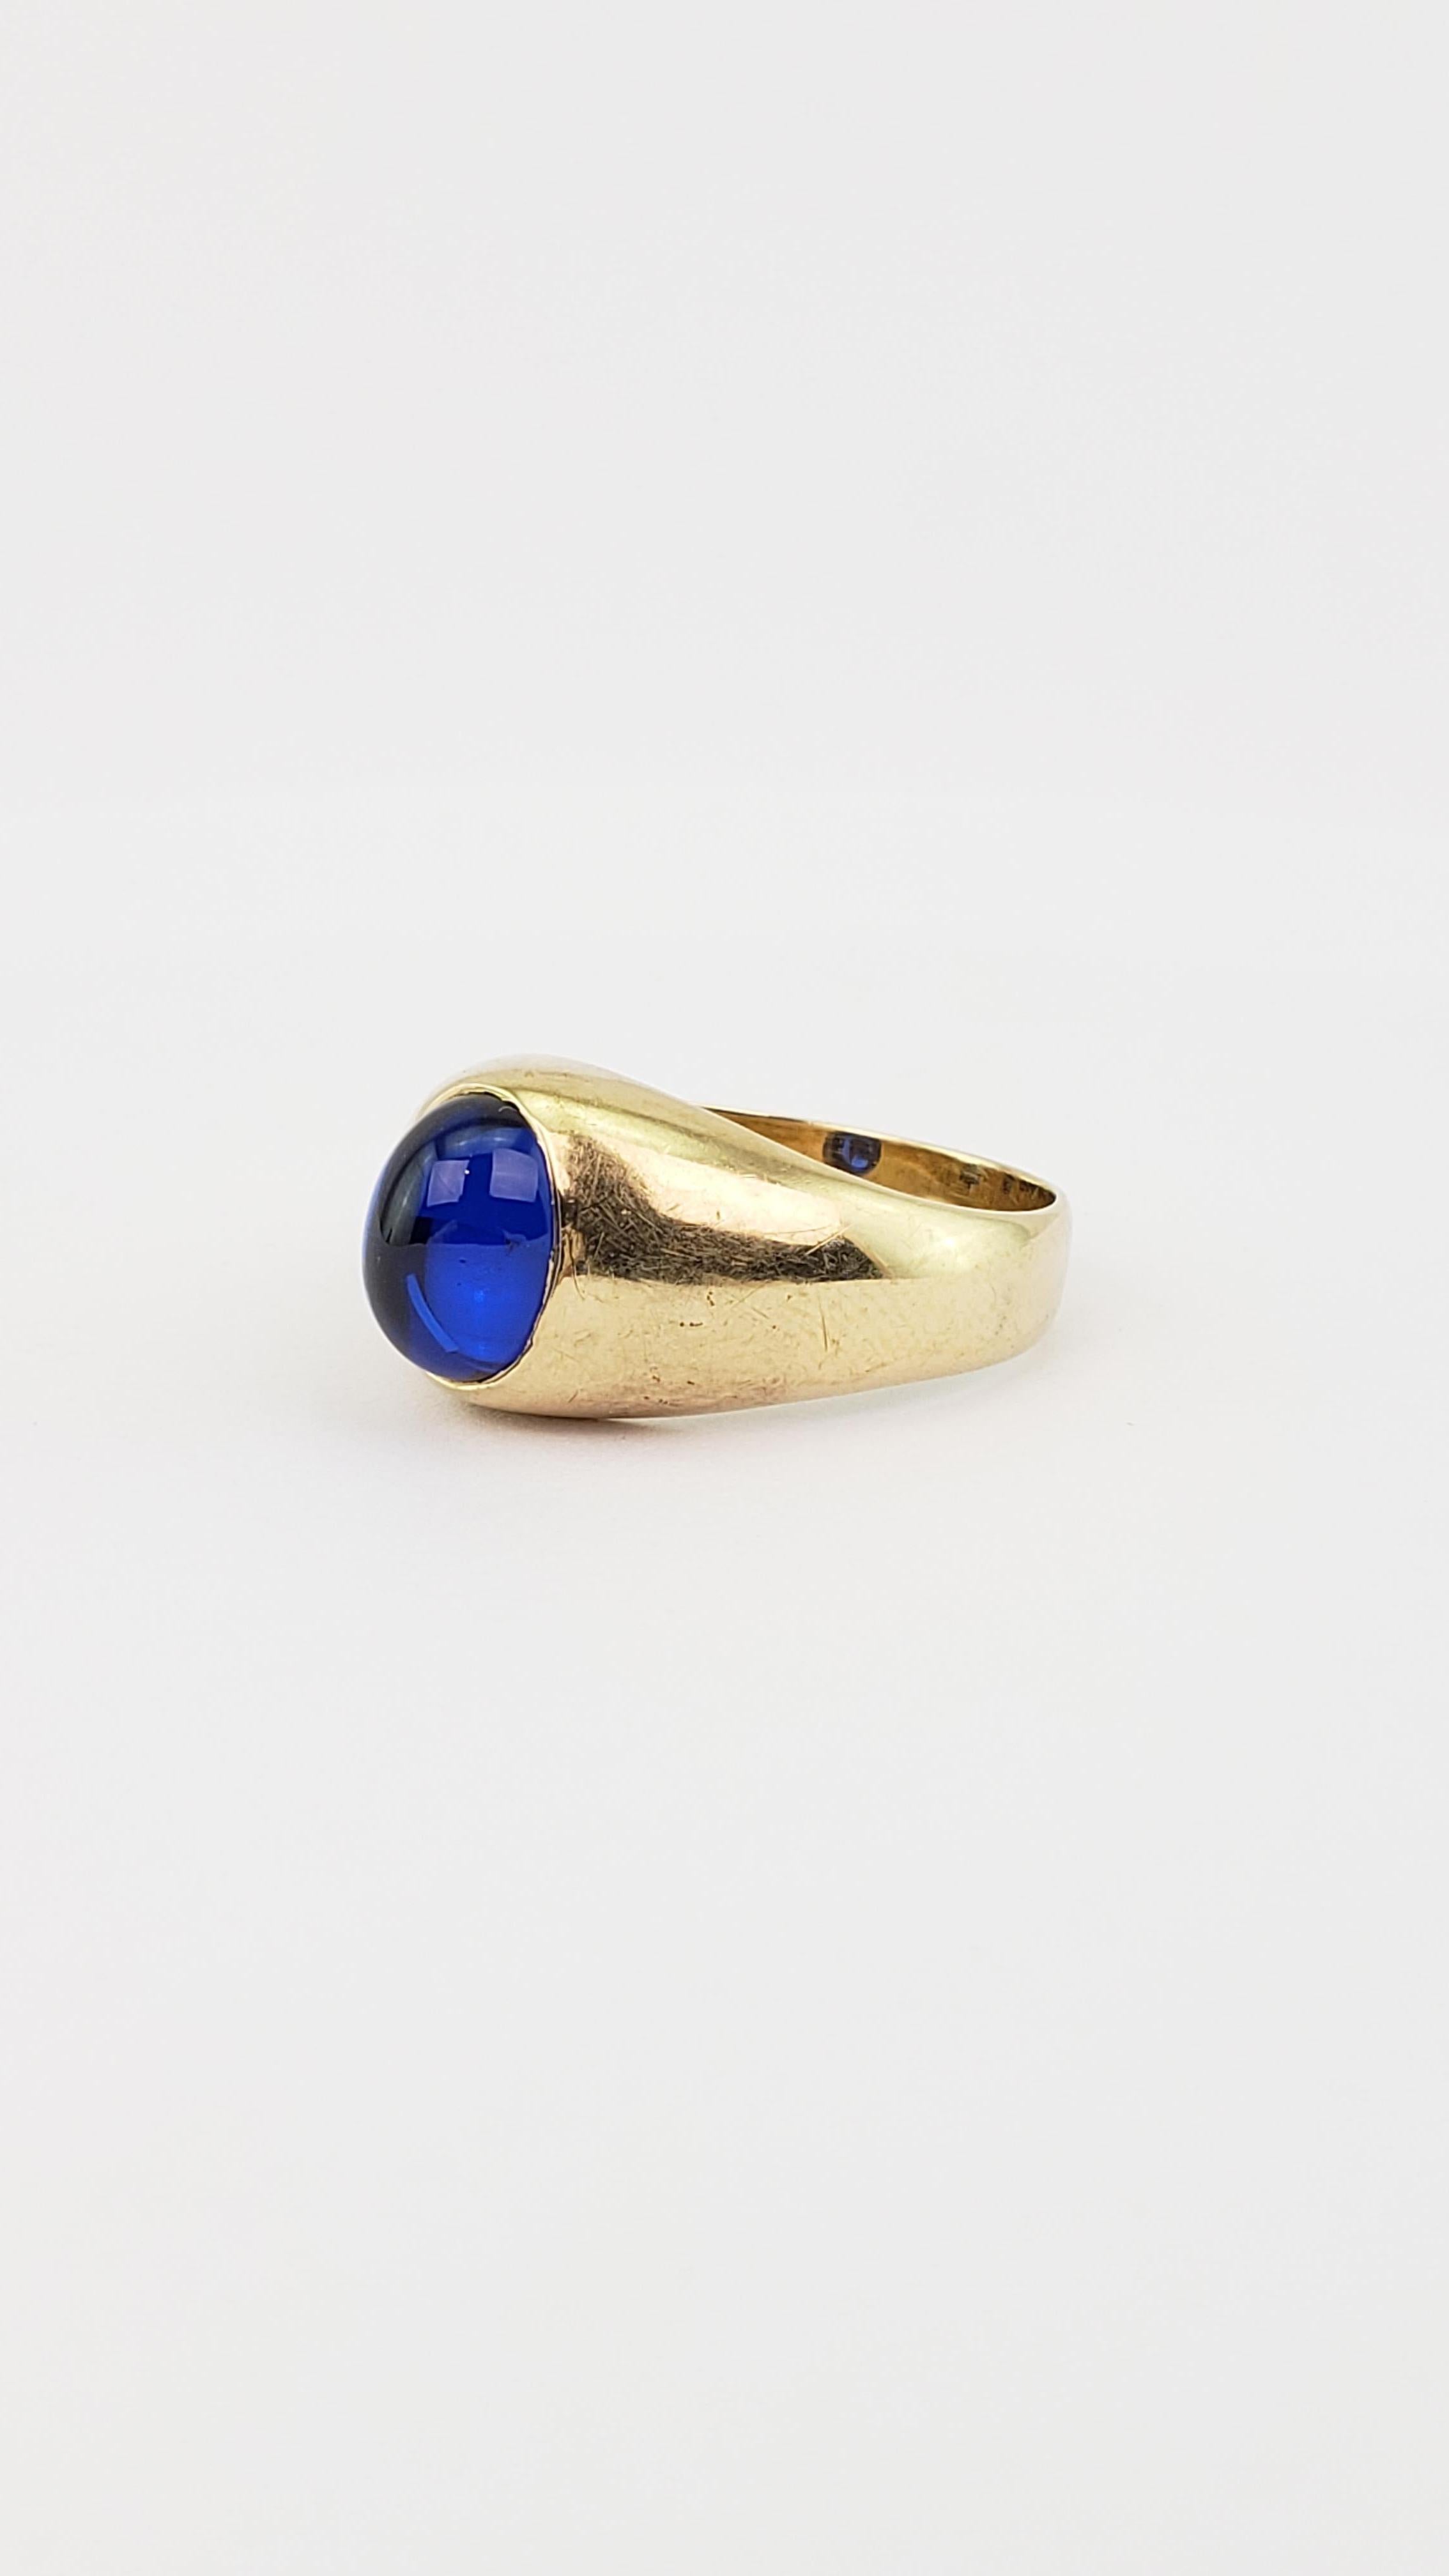 10K Gold Men's or Lady's Ring with Synthetic Blue Sapphire Oval Cabochon 2